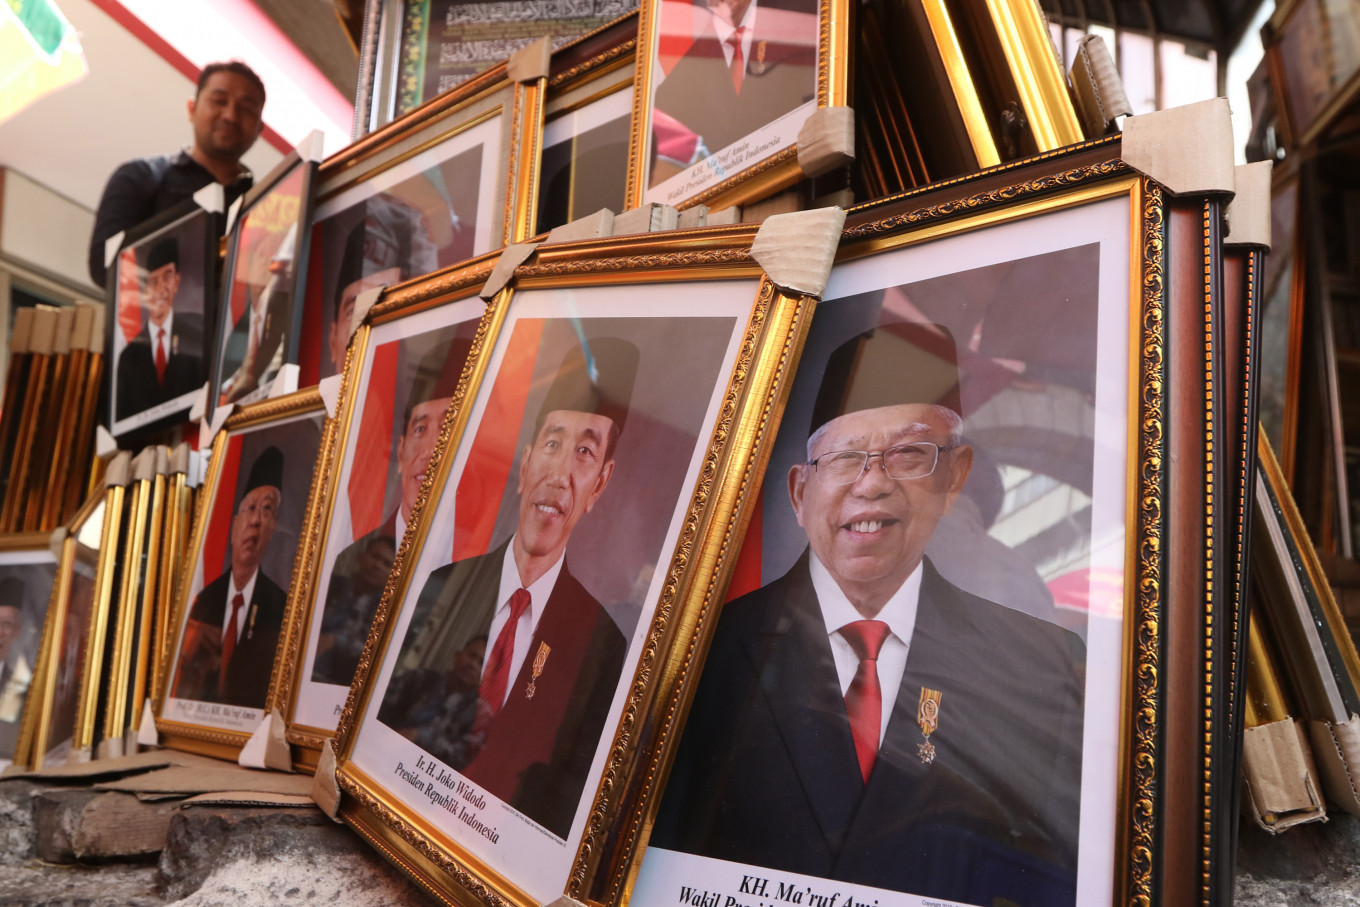 A resident browses through framed photos of President Joko “Jokowi” Widodo and Vice President Ma’ruf Amin at a stall in Pasar Baru, Central Jakarta, on Thursday. Issued by the State Secretariat, the official photo is available for free download at setneg.go.id. JP/Dhoni Setiawan